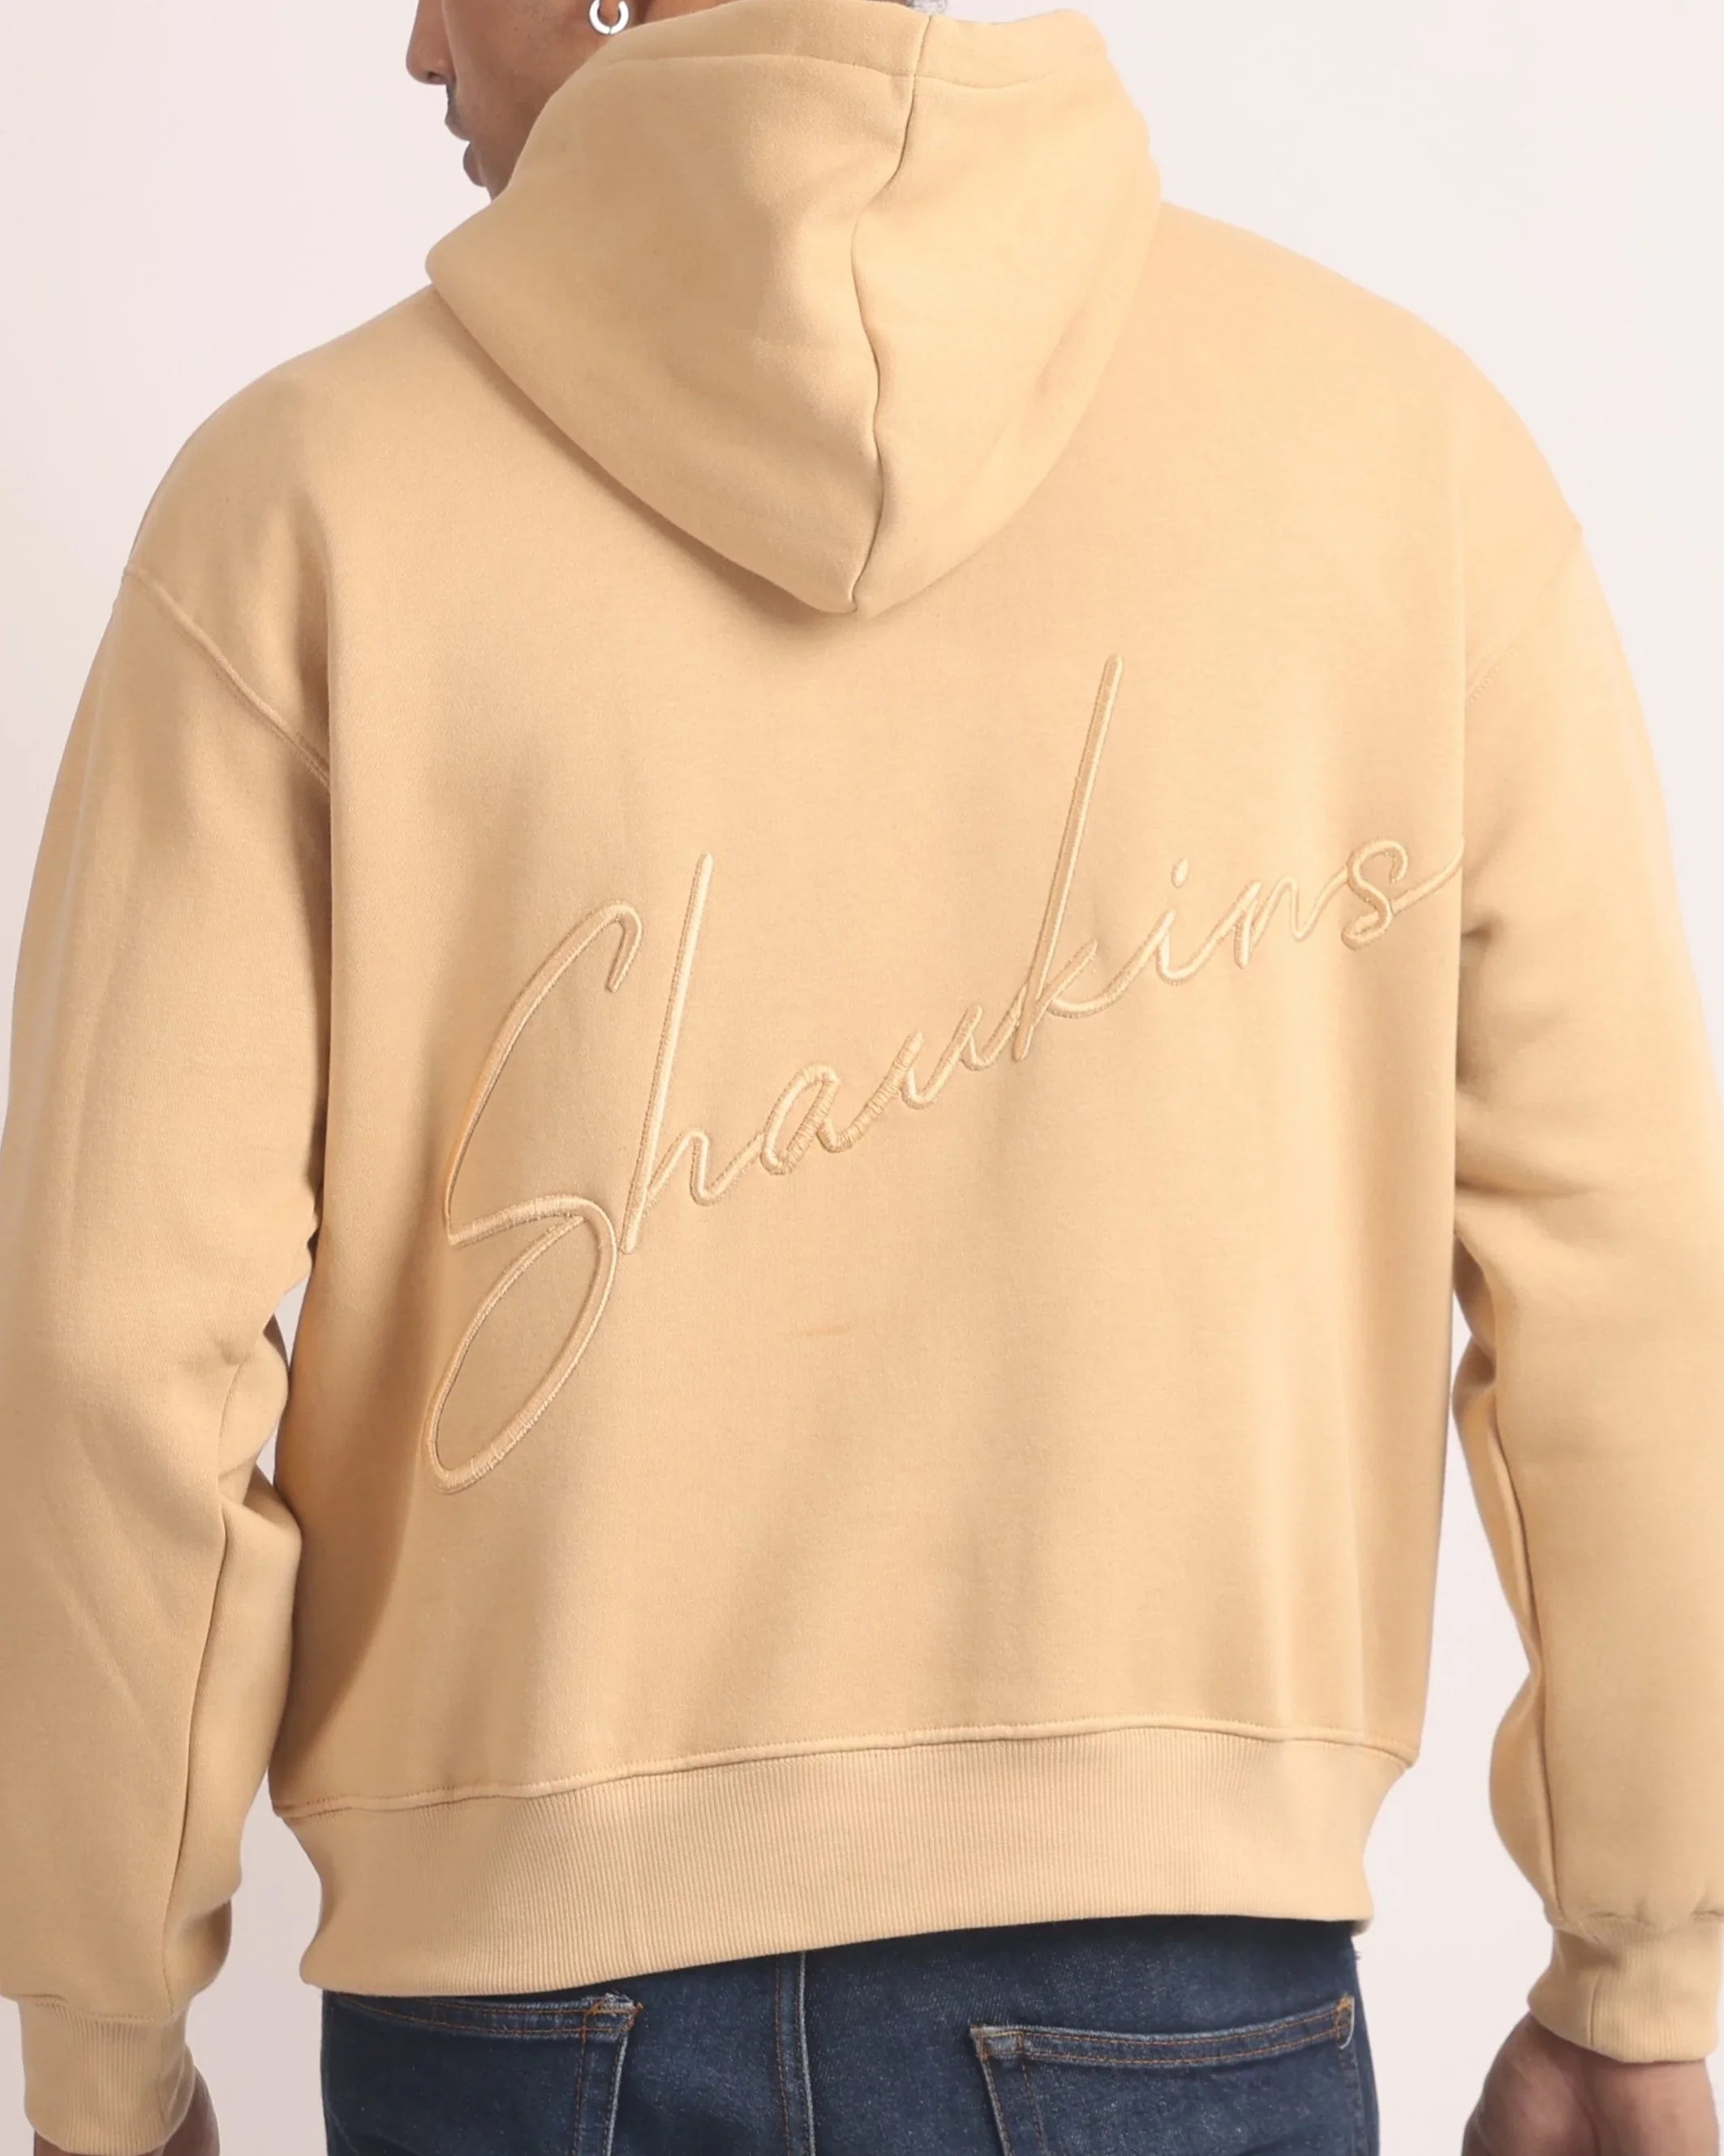 RELAXED FIT - ZIP TOP SWEATSHIRT – SHAUKINS